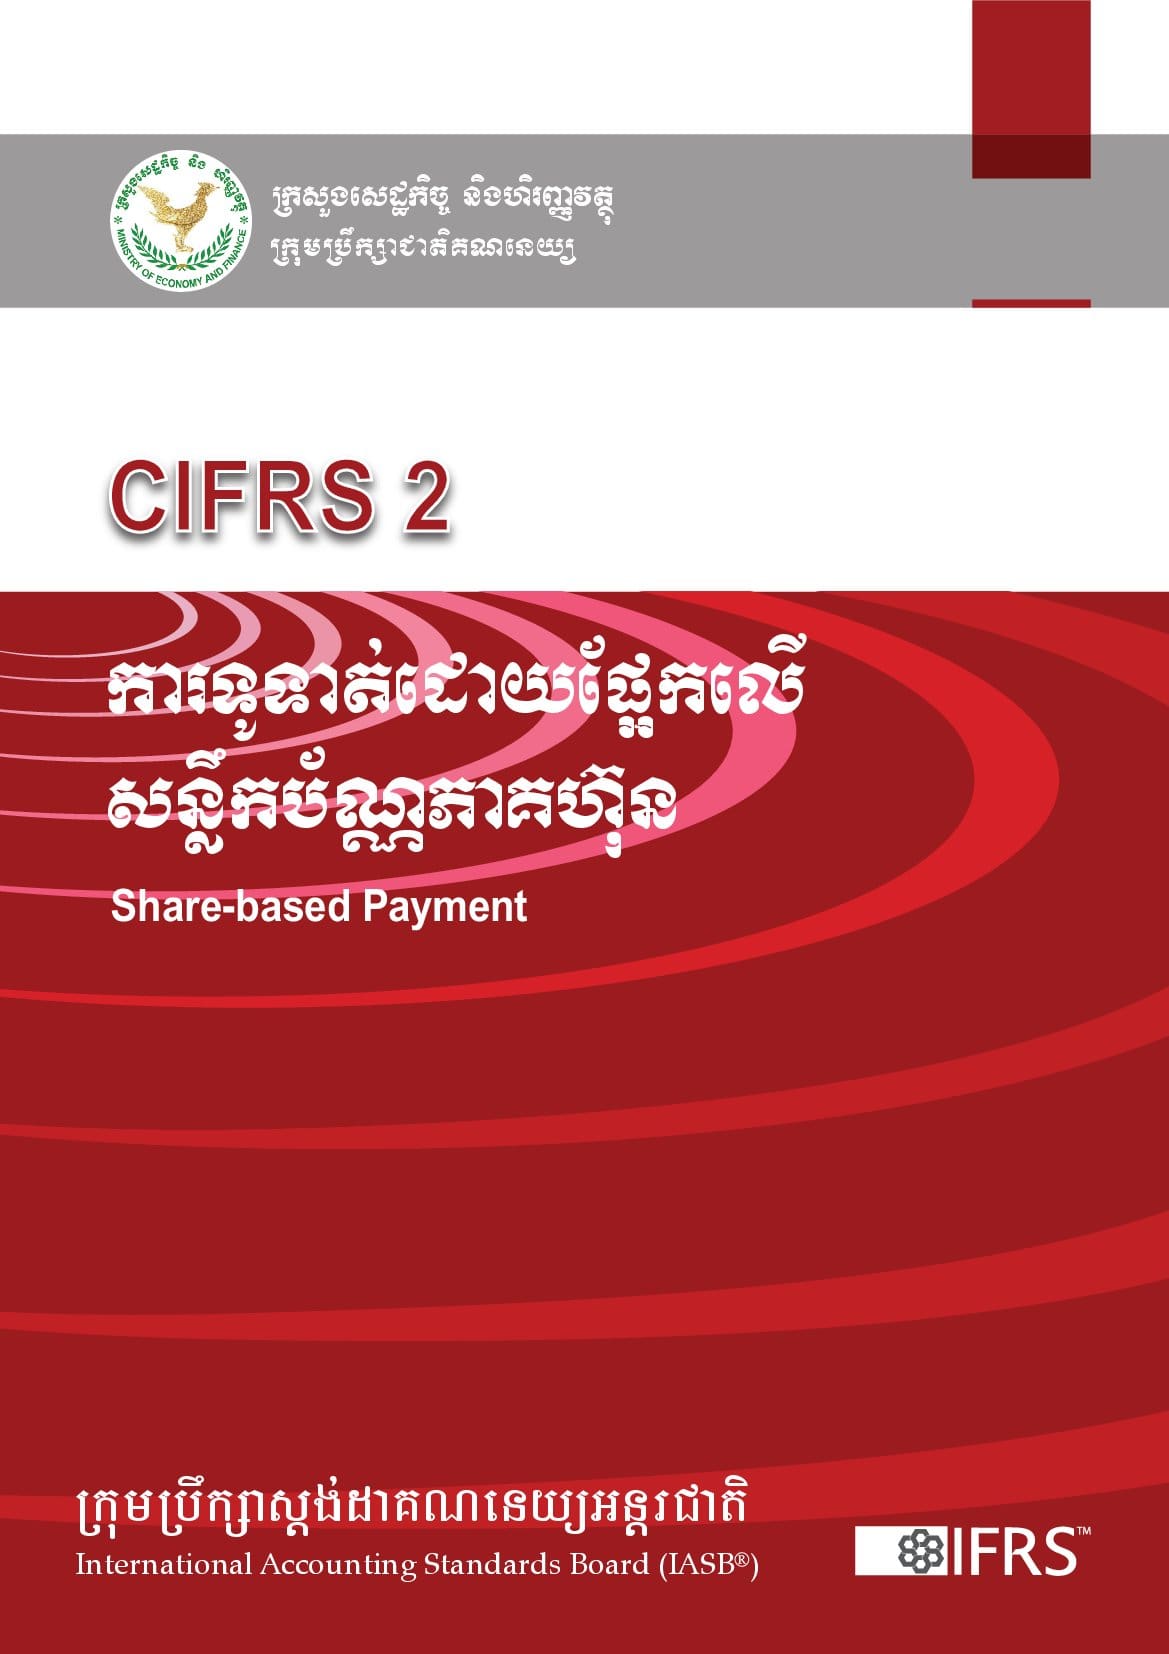 CIFRS2